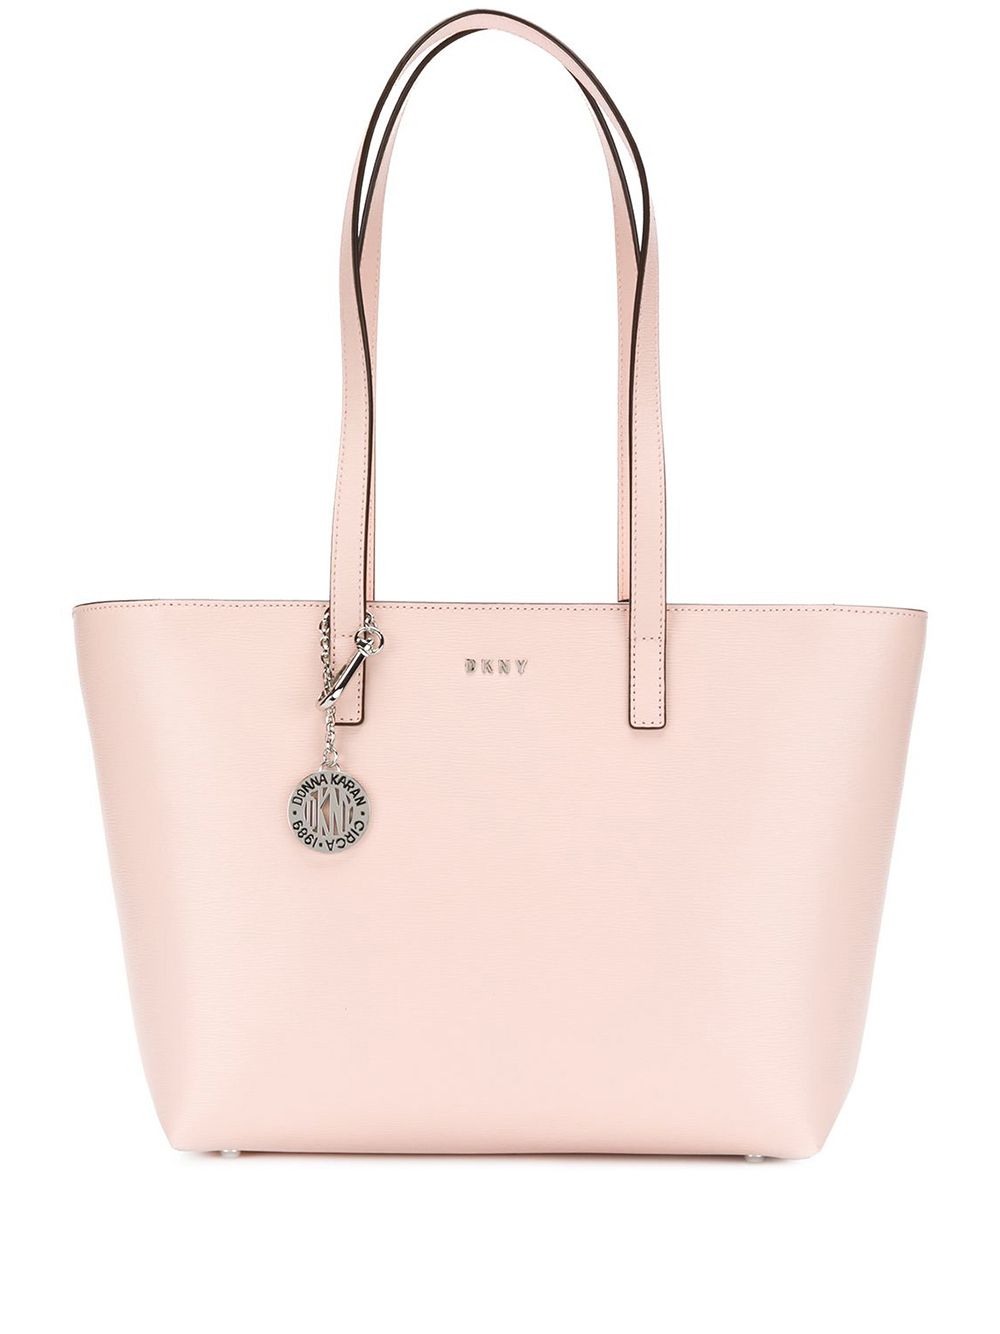 DKNY Nude Leather Shopper Bag with Metallic Charm, Natural.